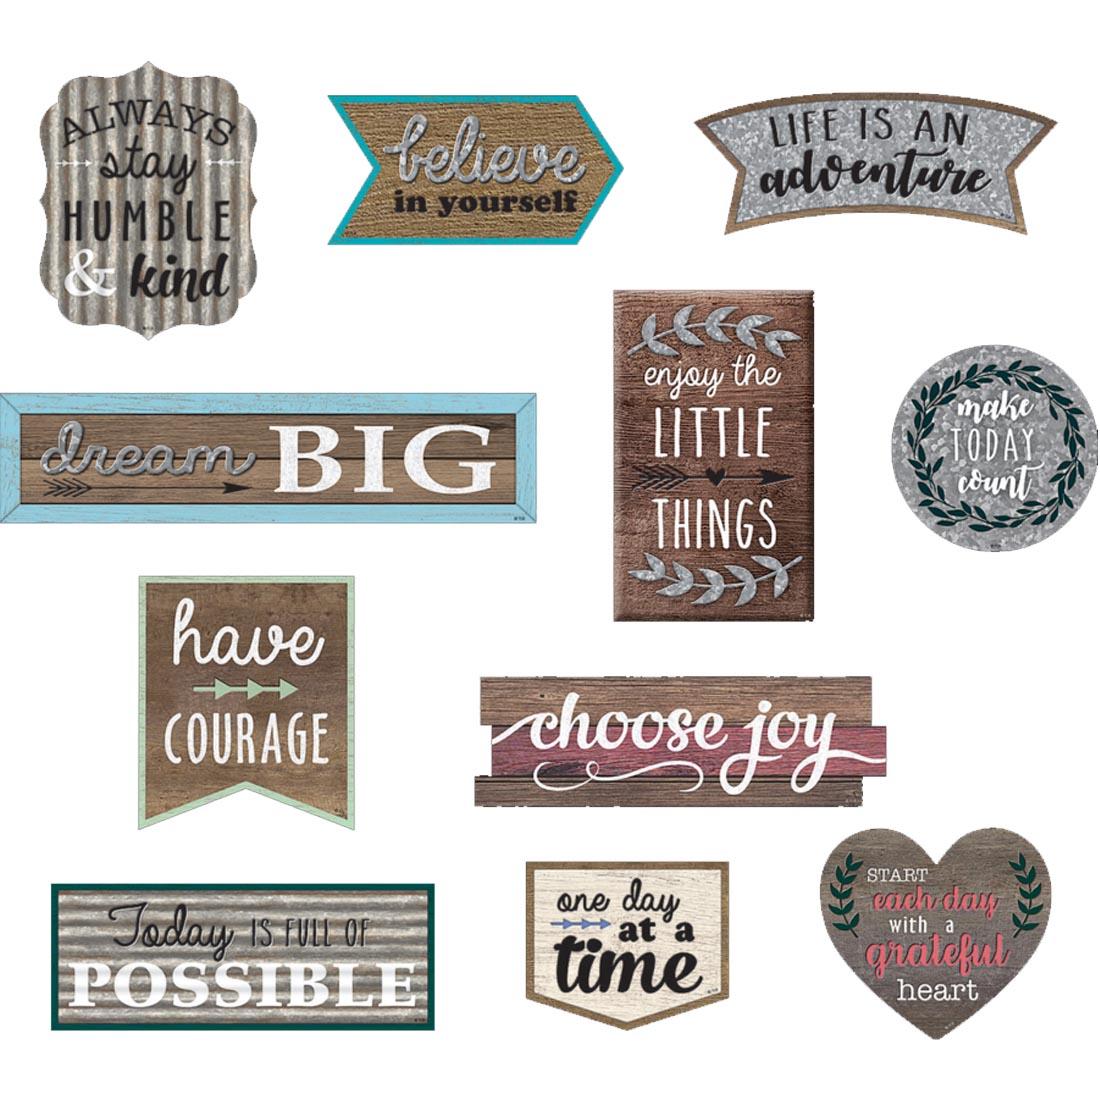 Clingy Thingies Positive Sayings Accents from the Home Sweet Classroom collection by Teacher Created Resources